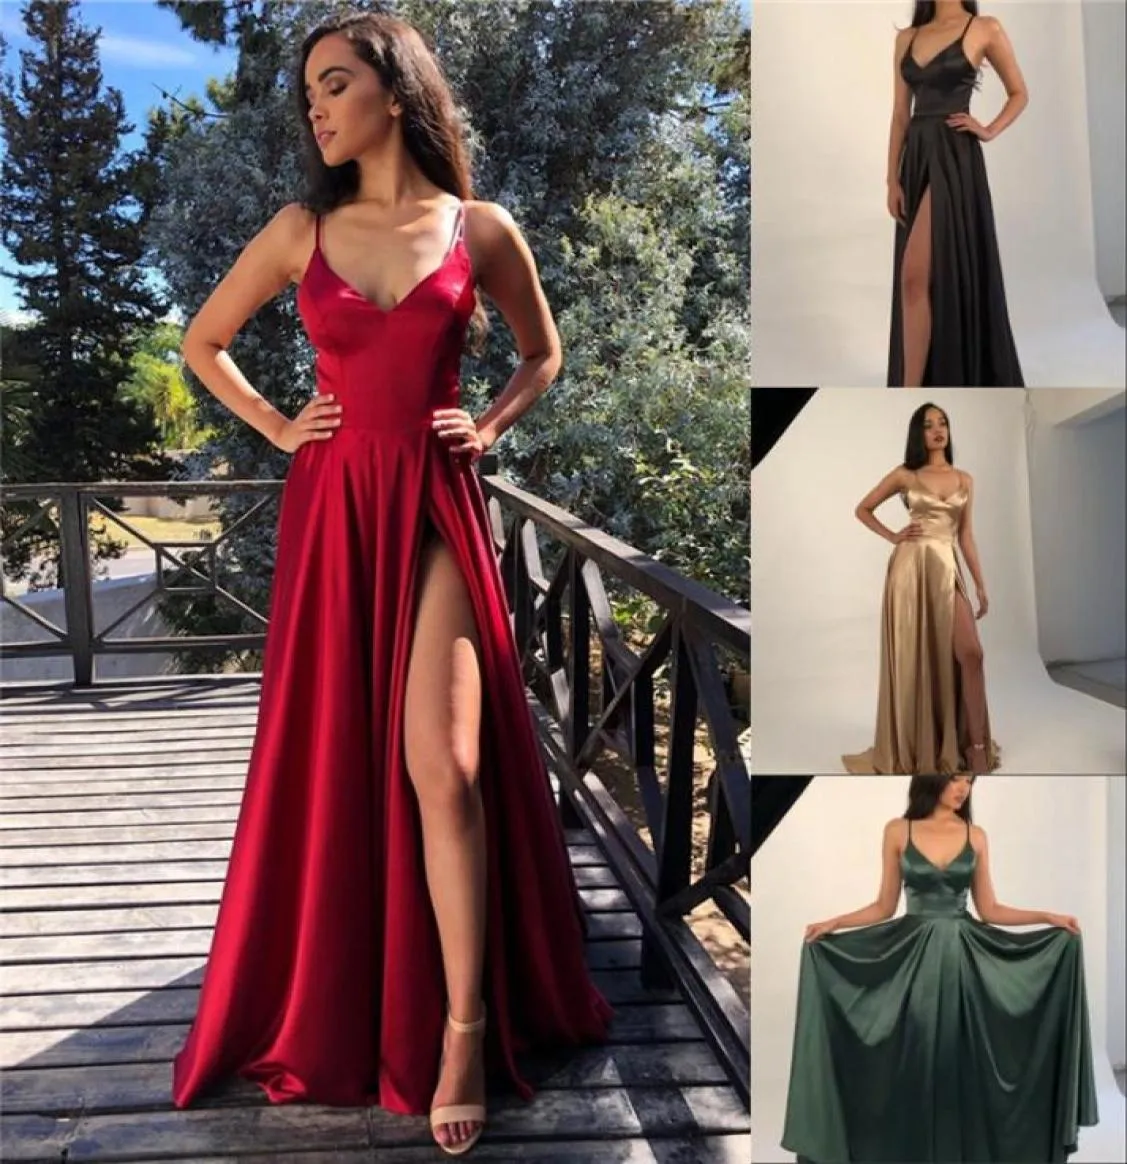 Sexy Spaghetti High Side Split Prom Dresses Cheap Satin Open Back Evening Gown Eleagnt Formal Party Bridesmaid Dress BM15409541037